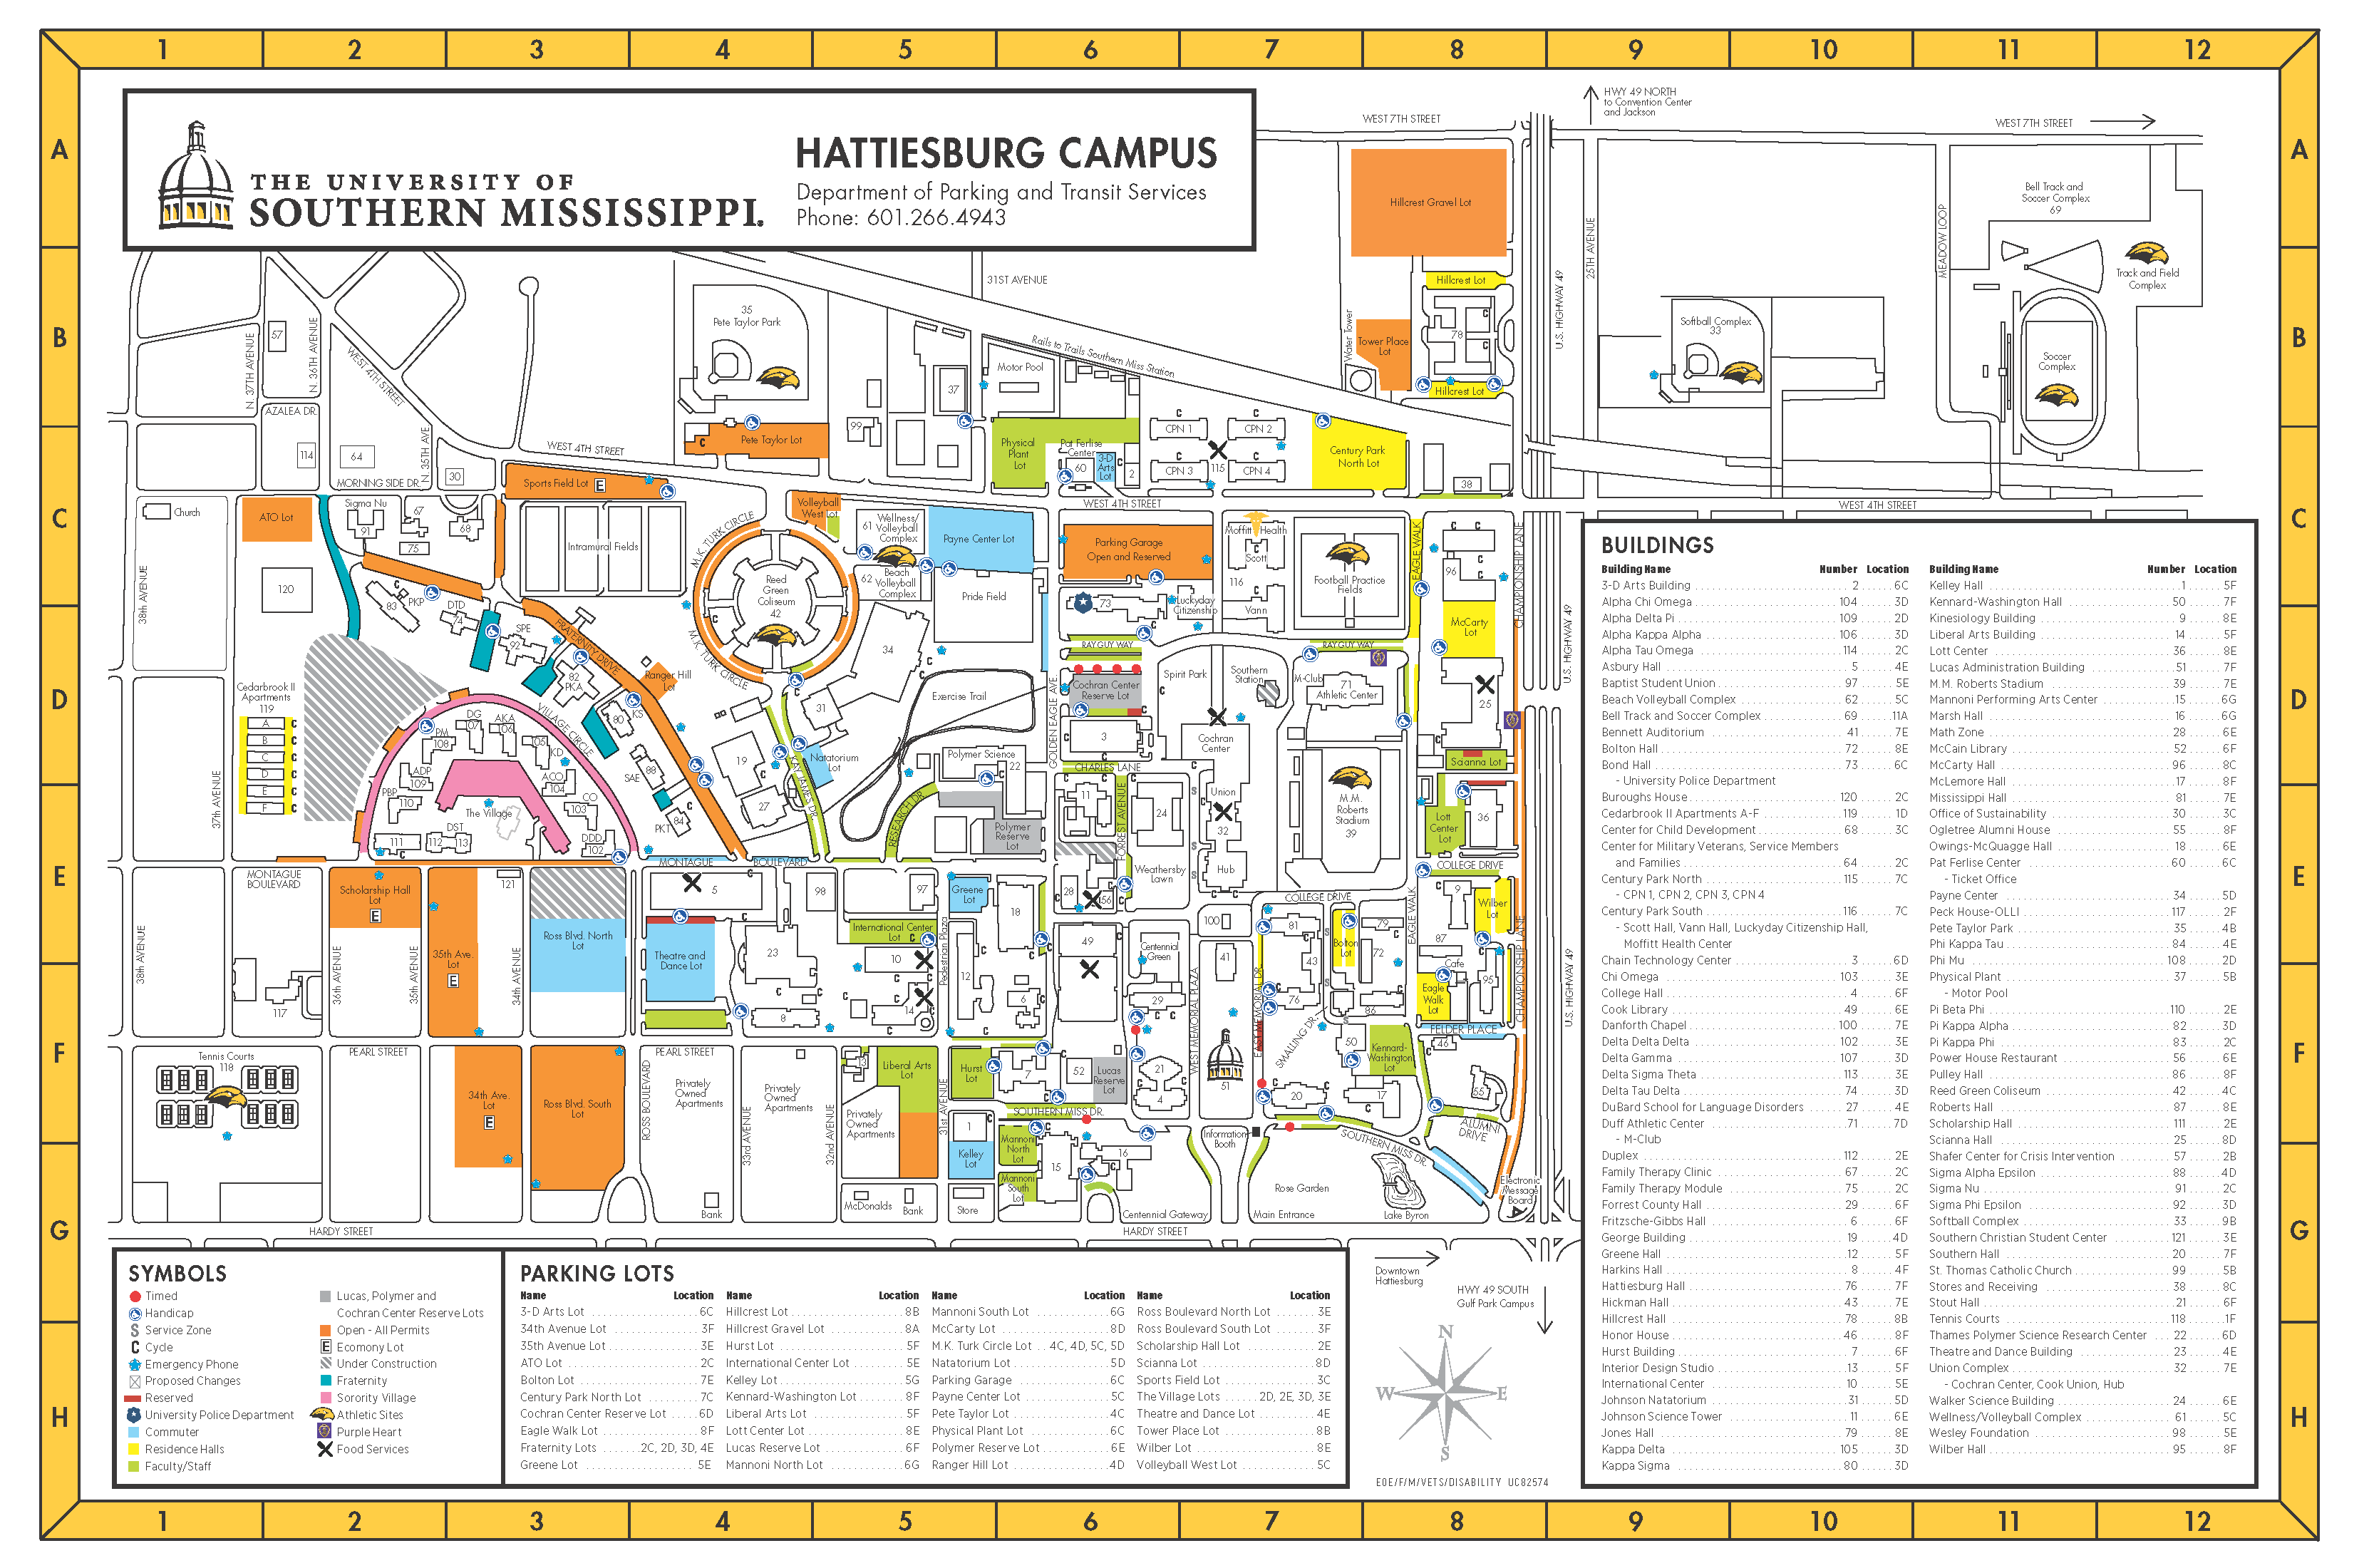 Campus Maps | Parking and Transit Services | The University of Southern